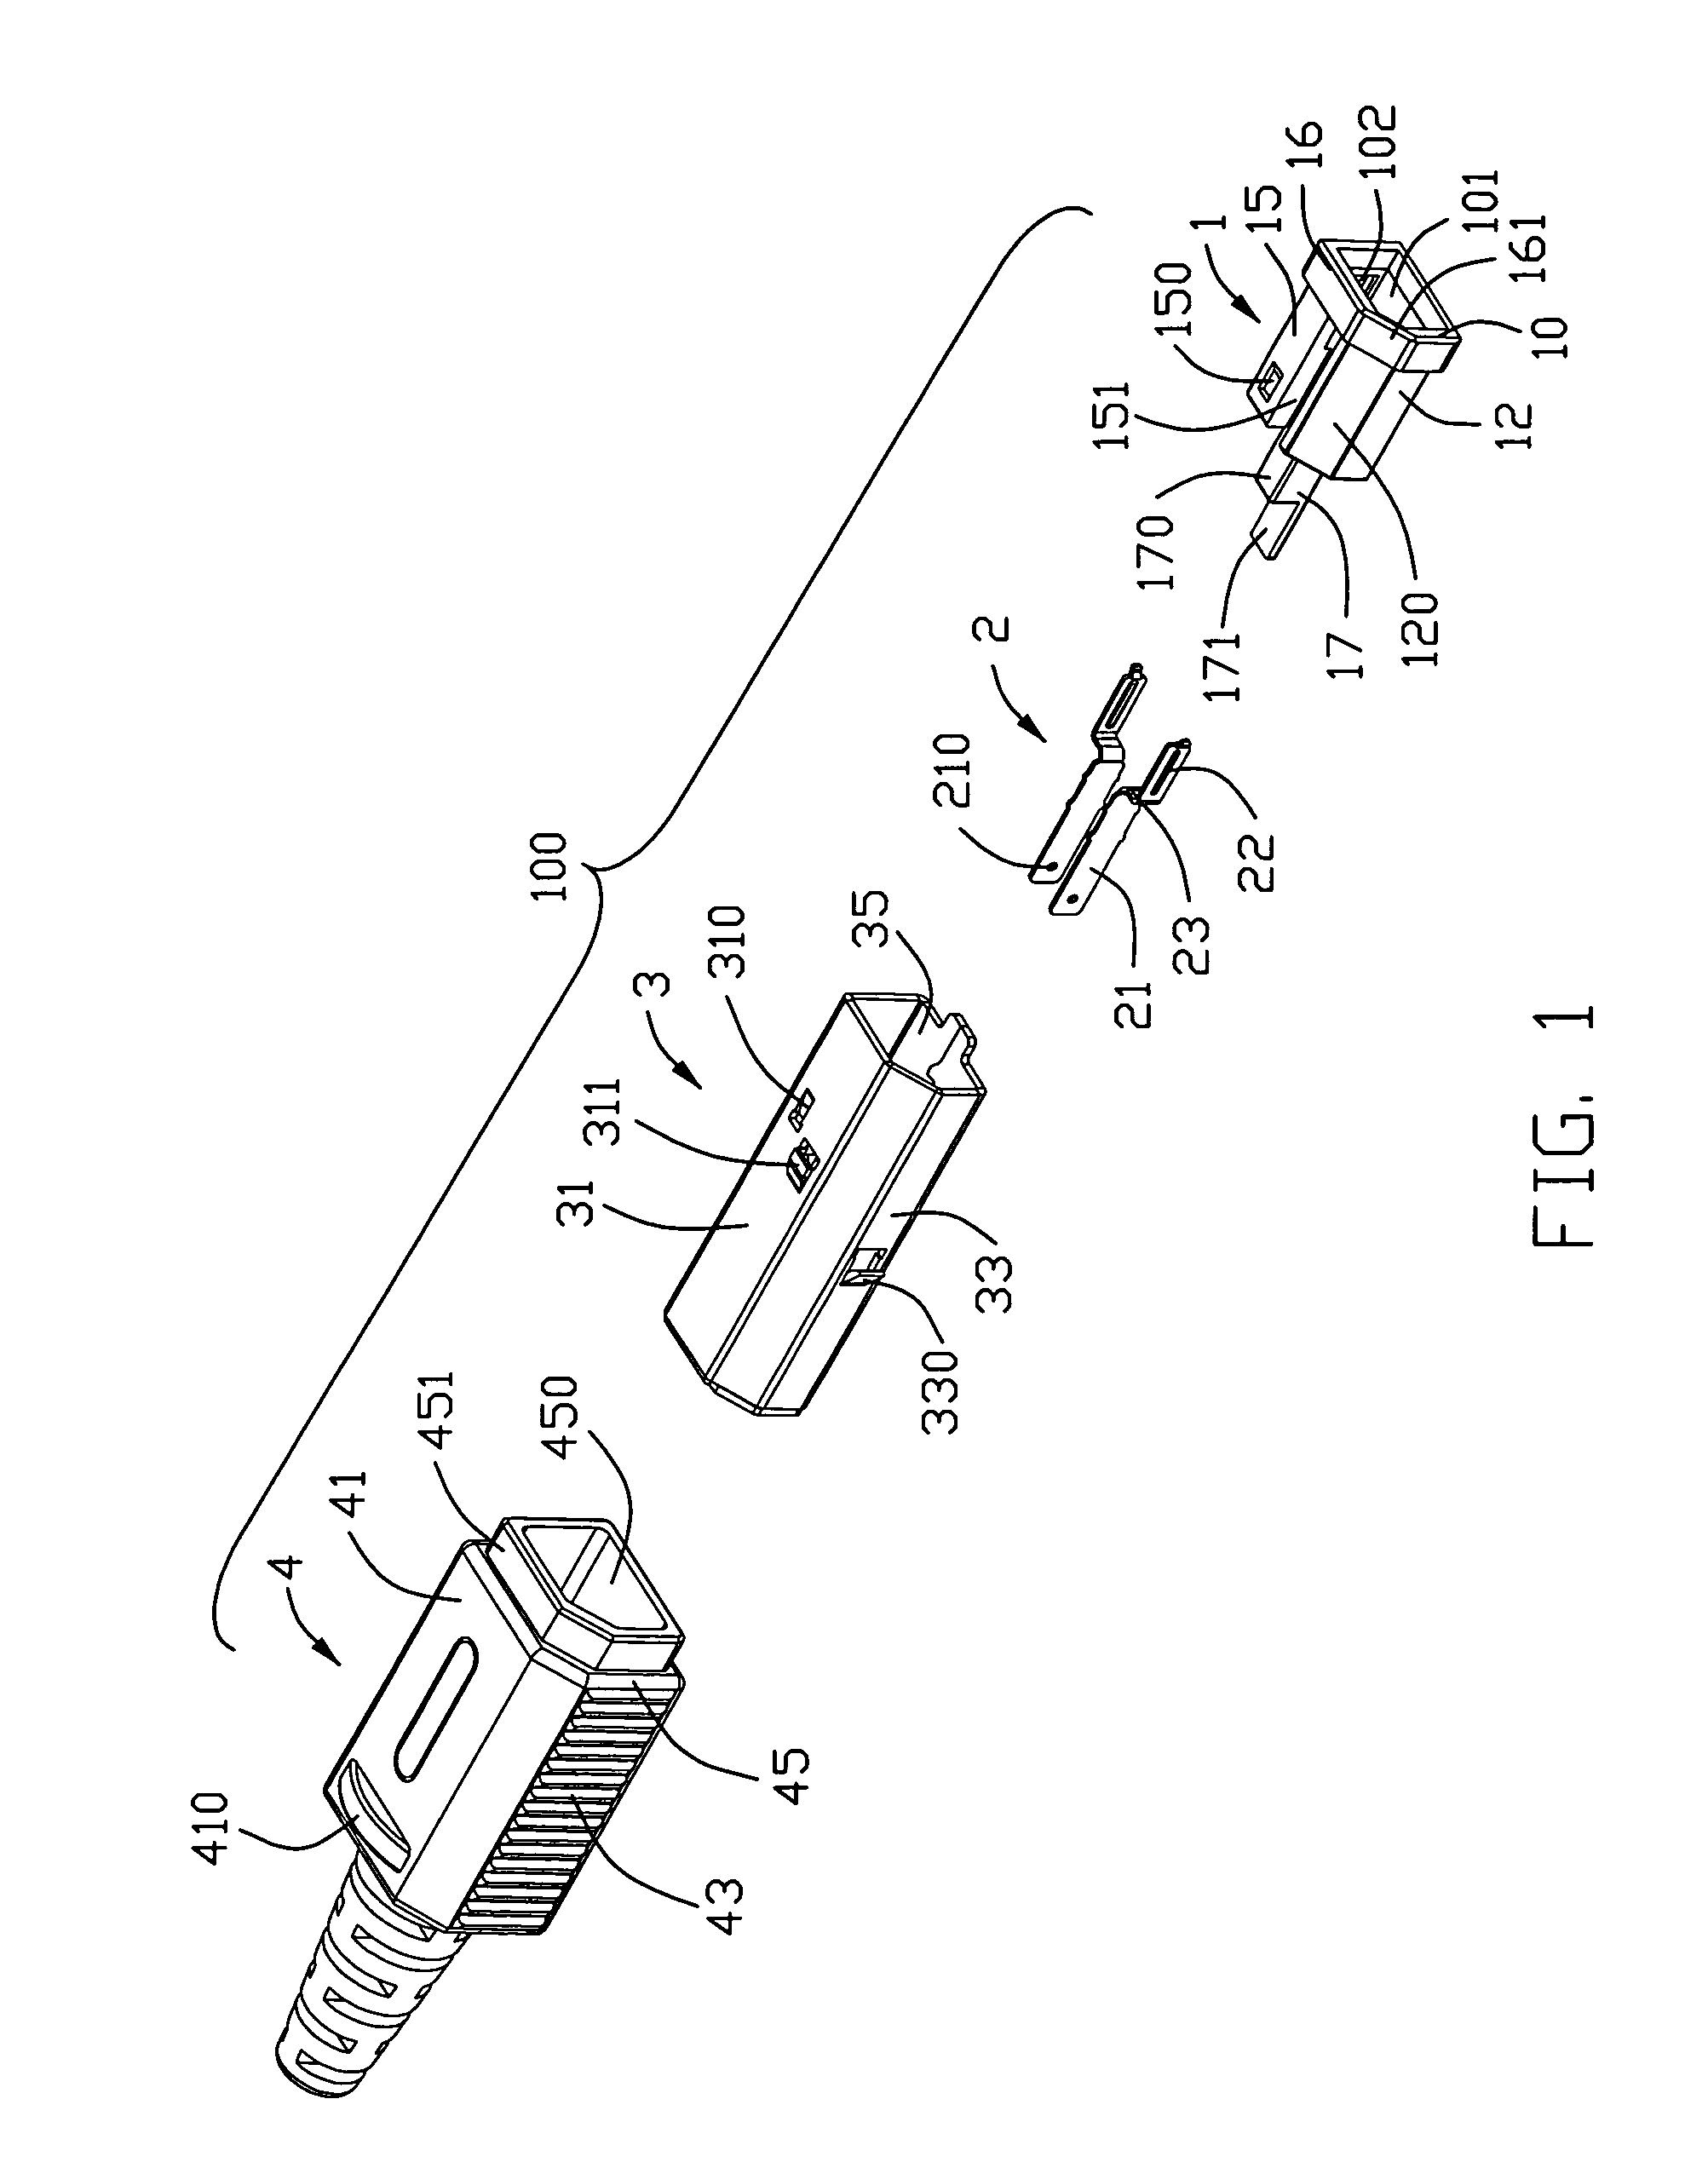 Electrical connector with contact terminals isolated from each other within the housing